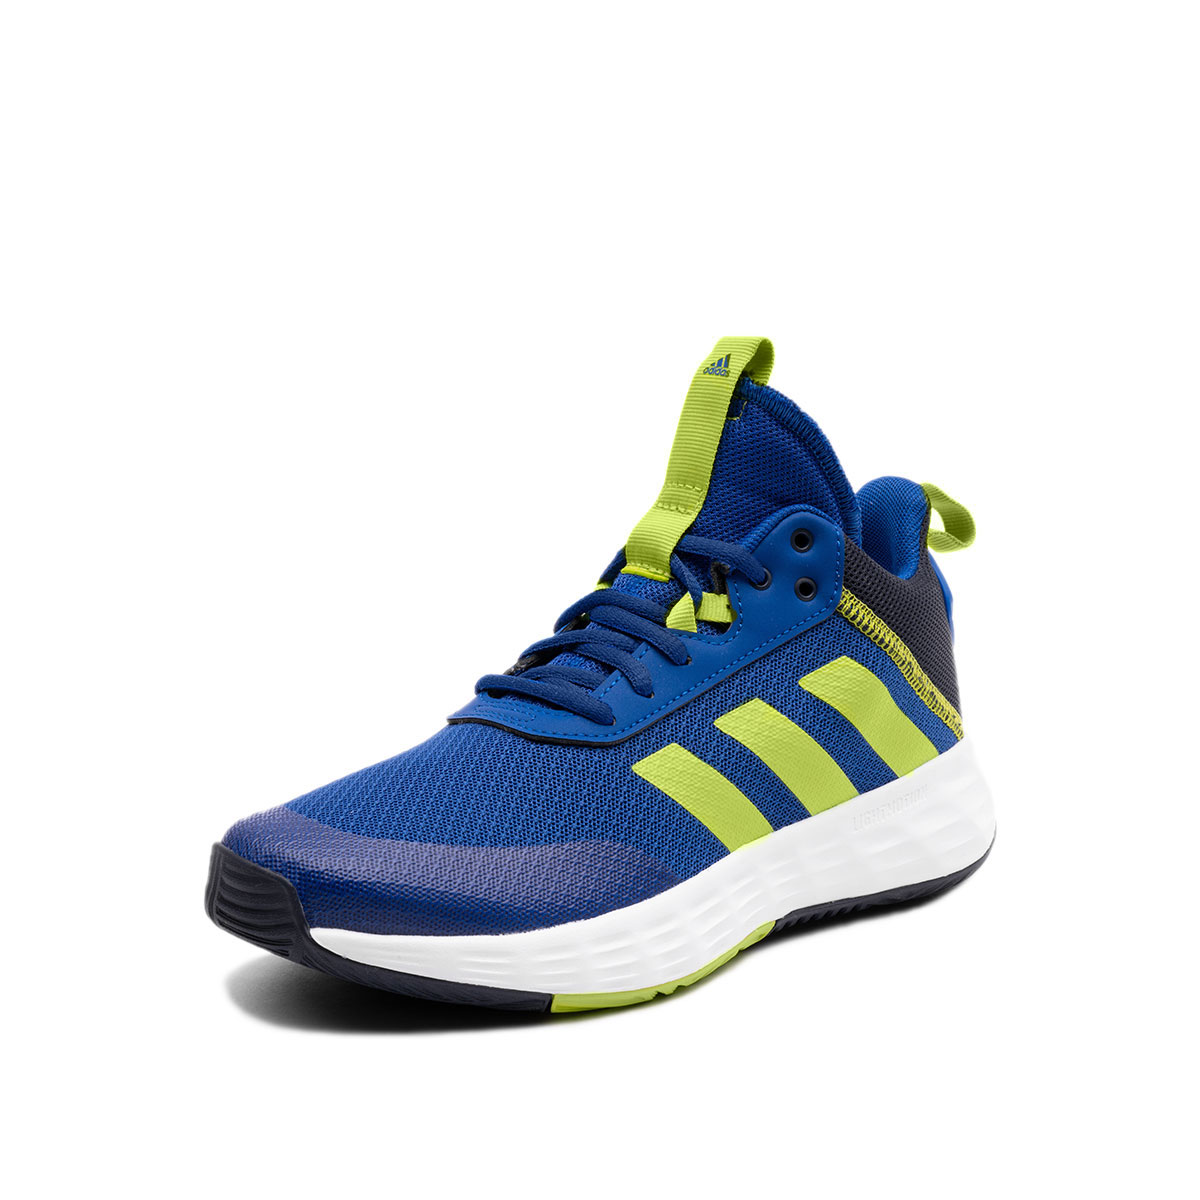 adidas Ownthegame 2.0  H01557